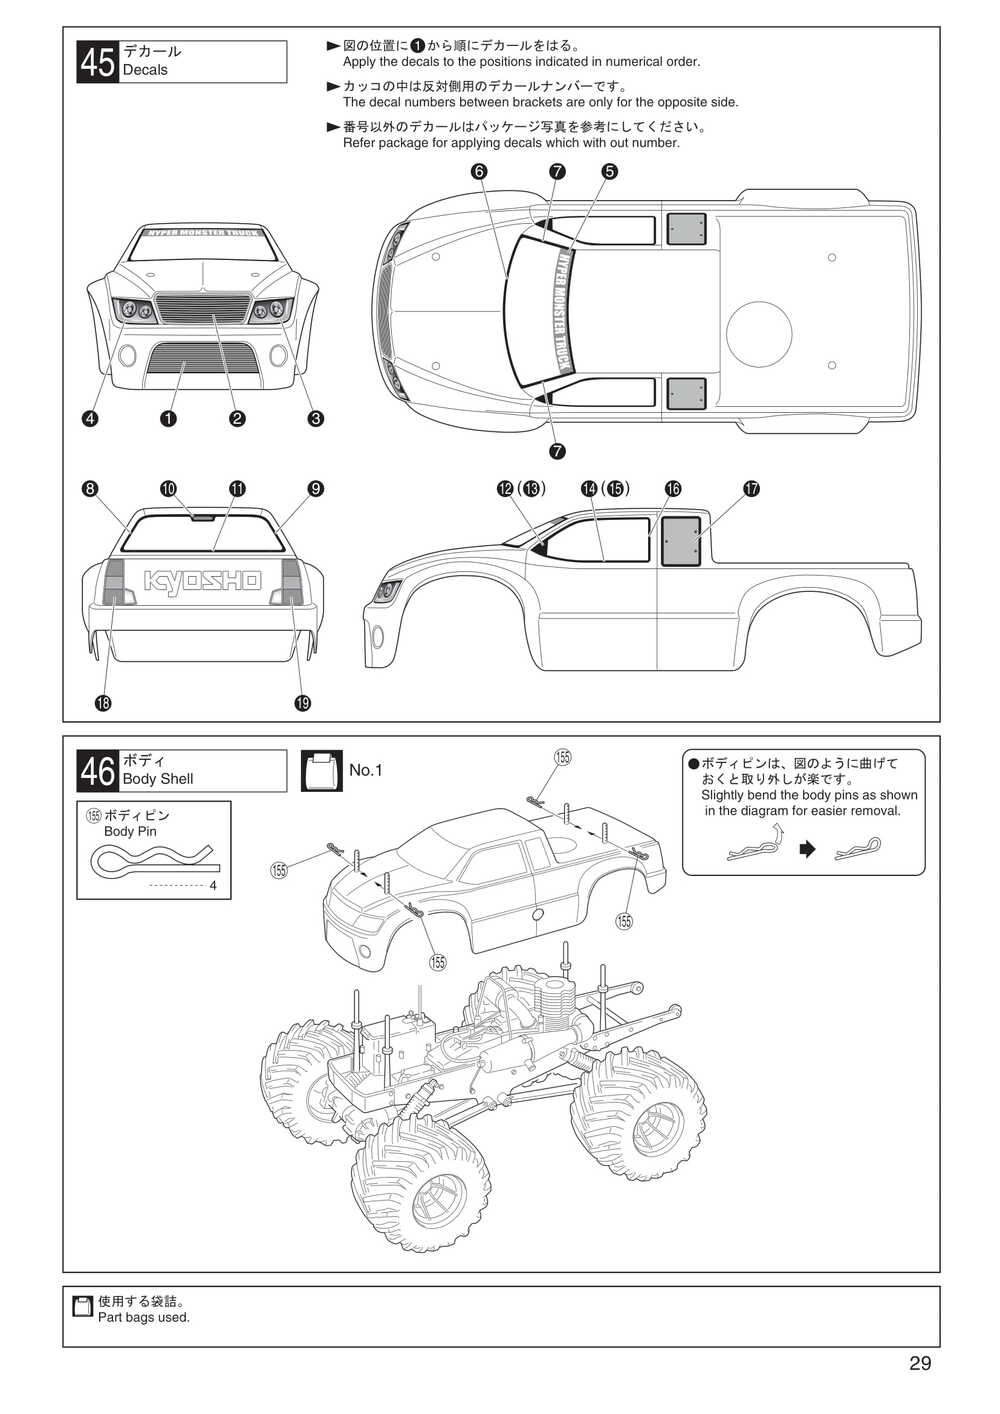 Kyosho - 31221 - Mad-Force - Manual - Page 29